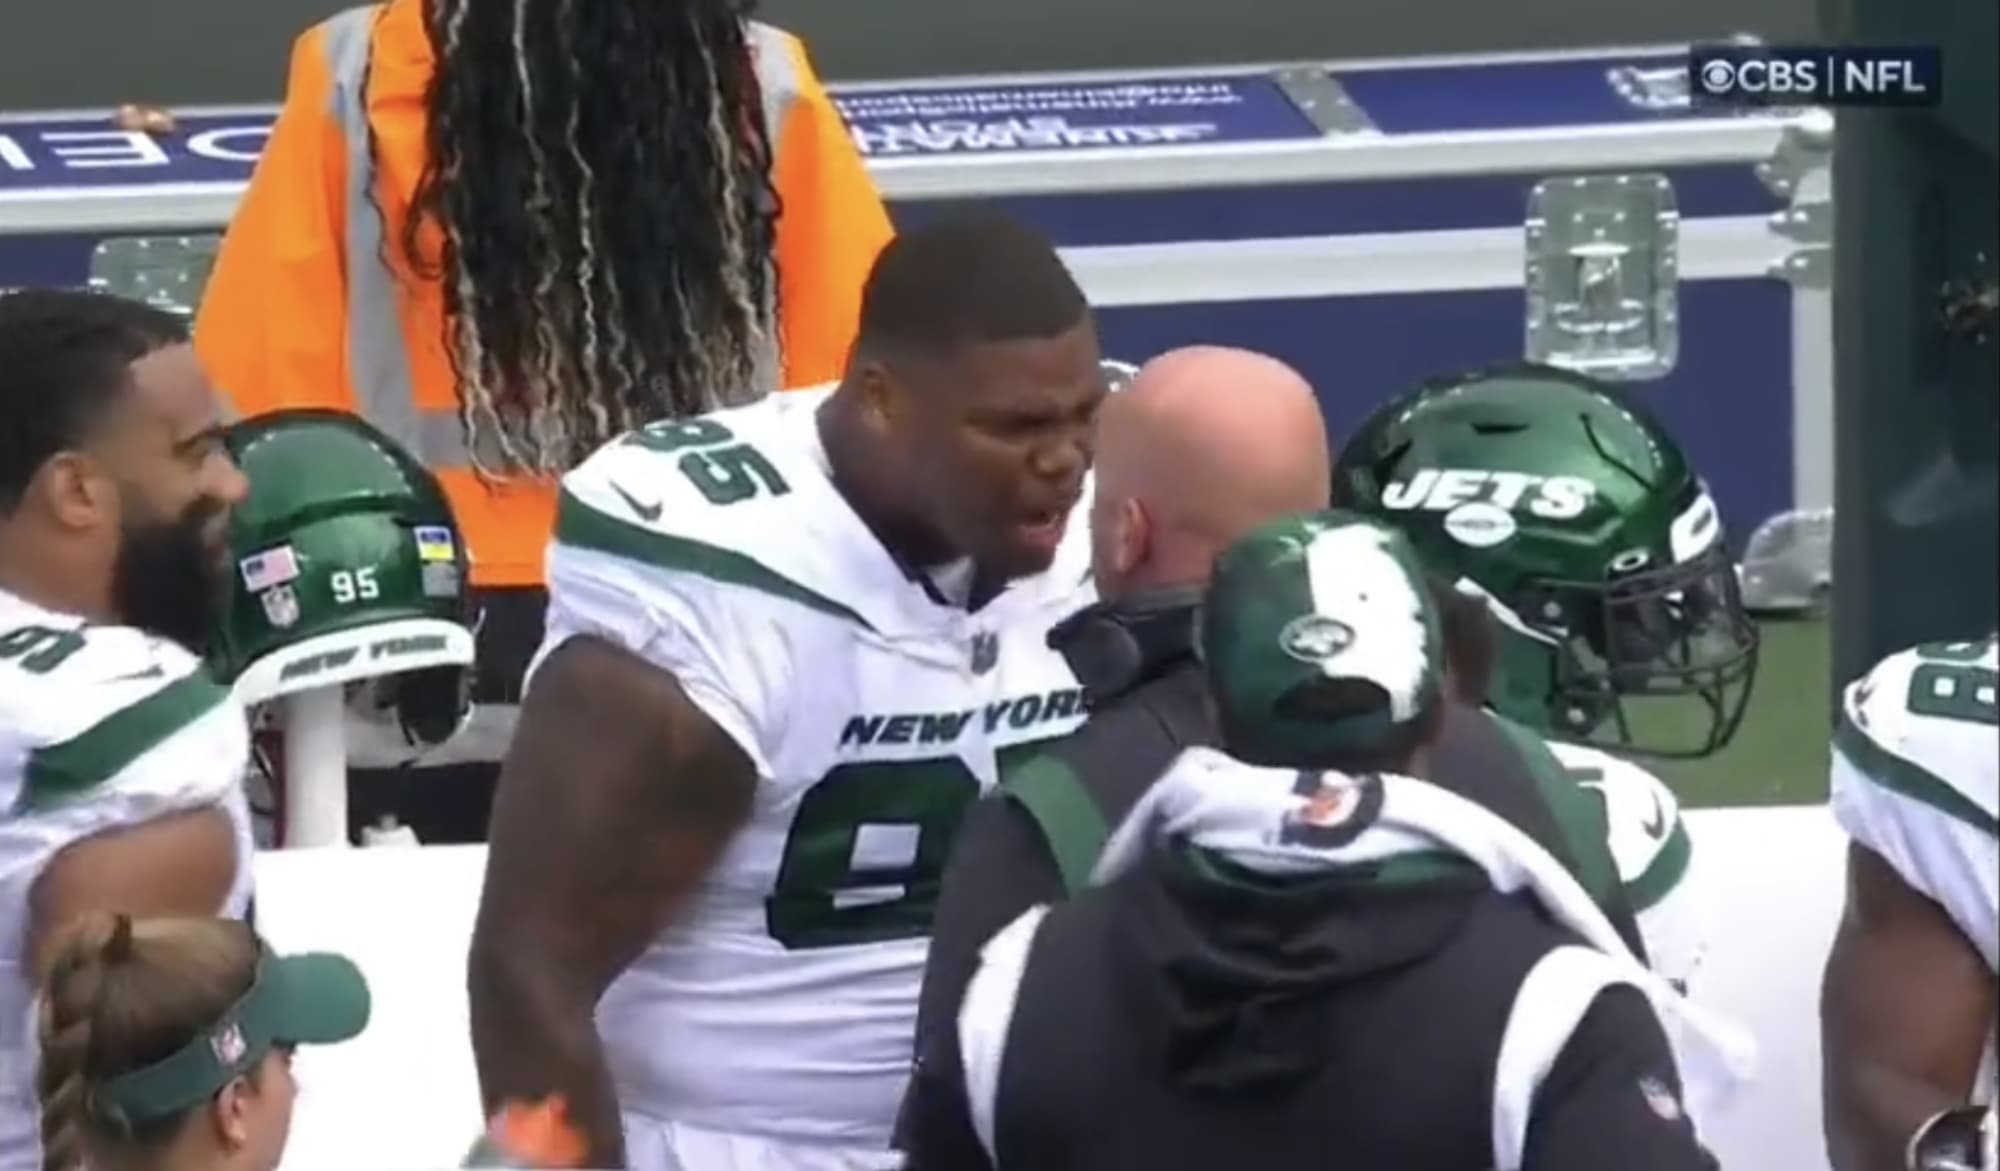 Quinnen Williams gets into confrontation with coach on Jets sideline (Video)